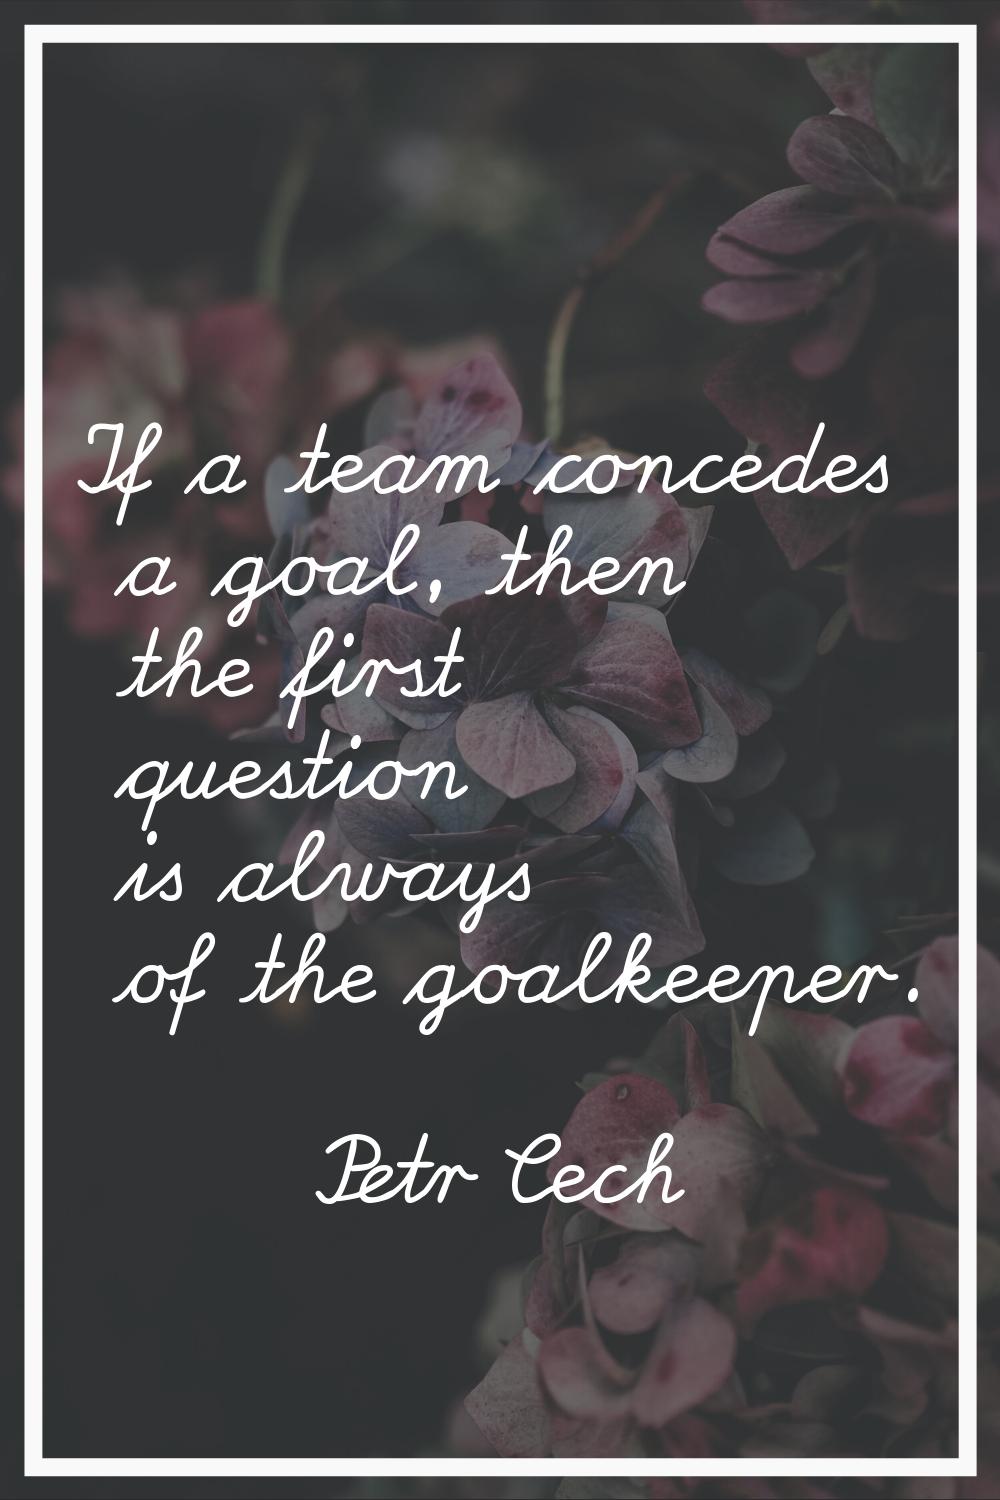 If a team concedes a goal, then the first question is always of the goalkeeper.